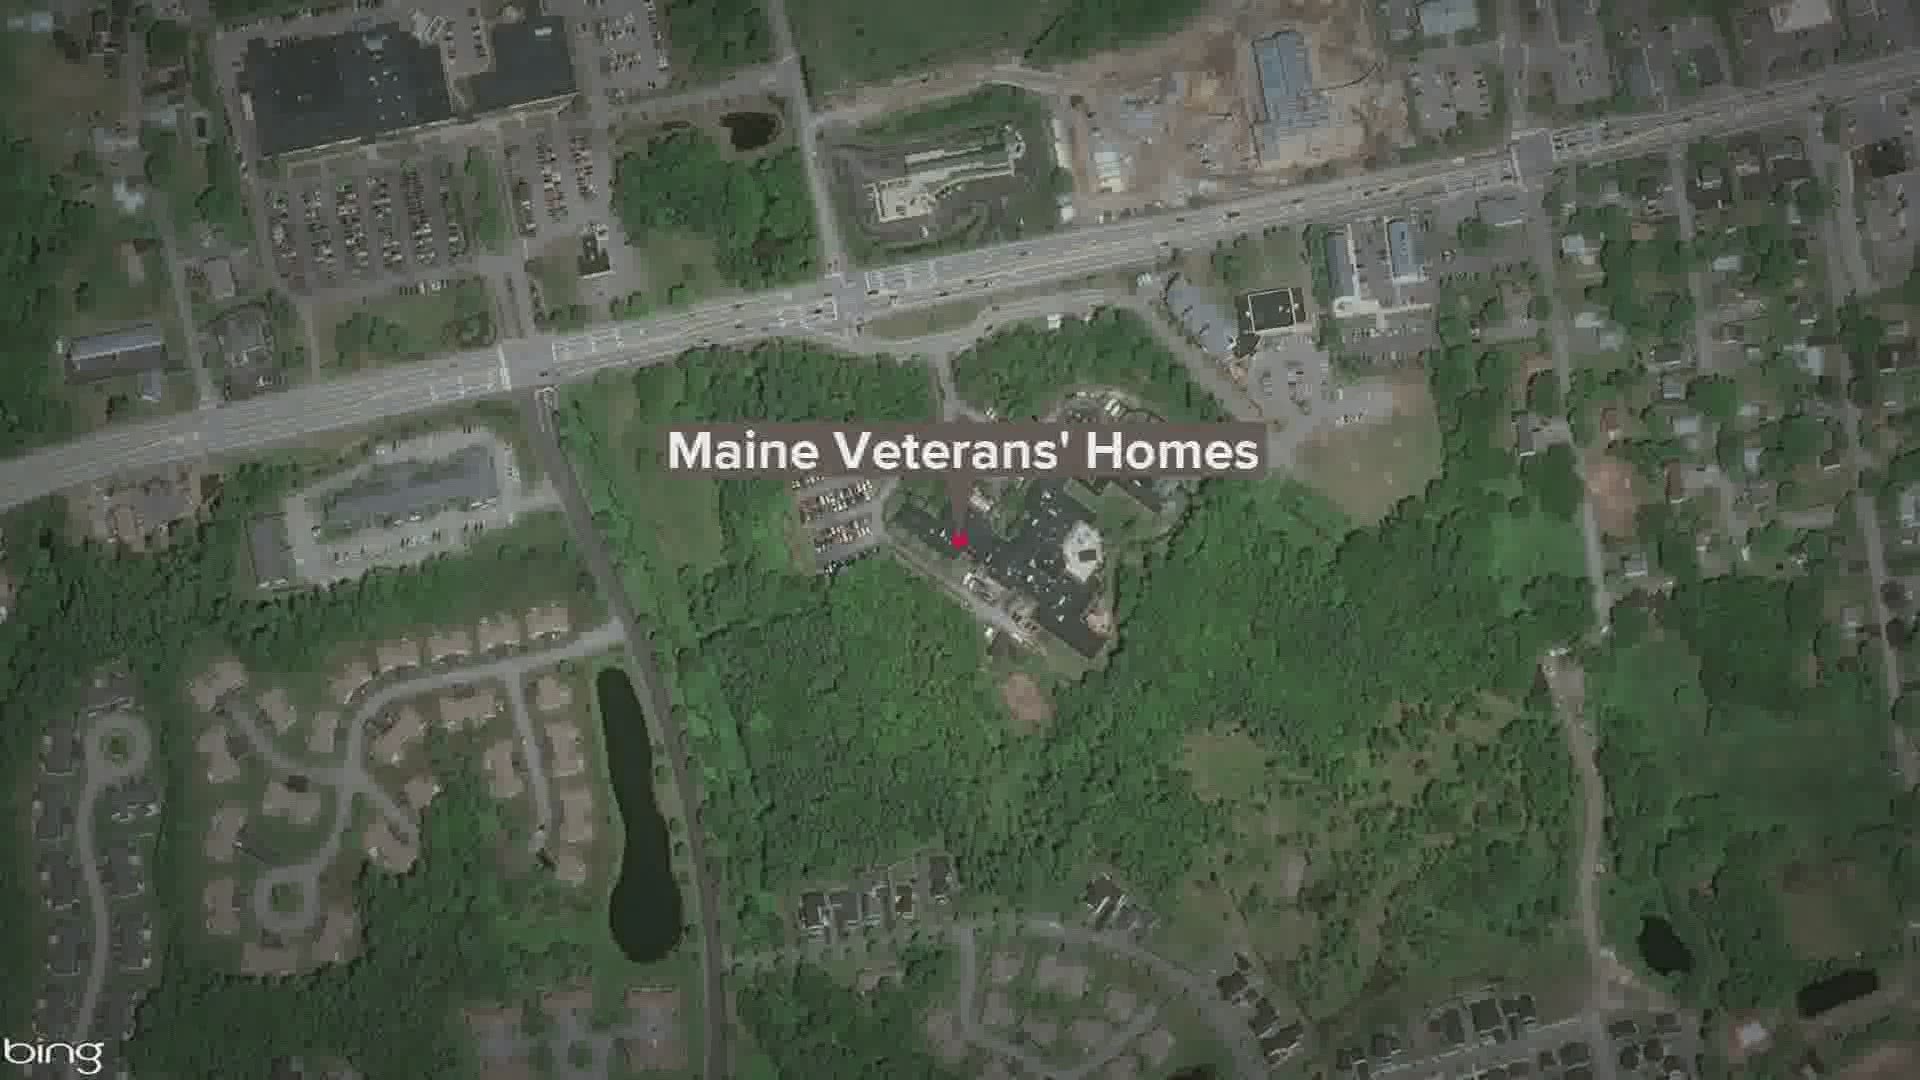 It's been announced that six staff members and three residents of Maine Veteran's Home in Scarborough have tested positive for COVID-19.